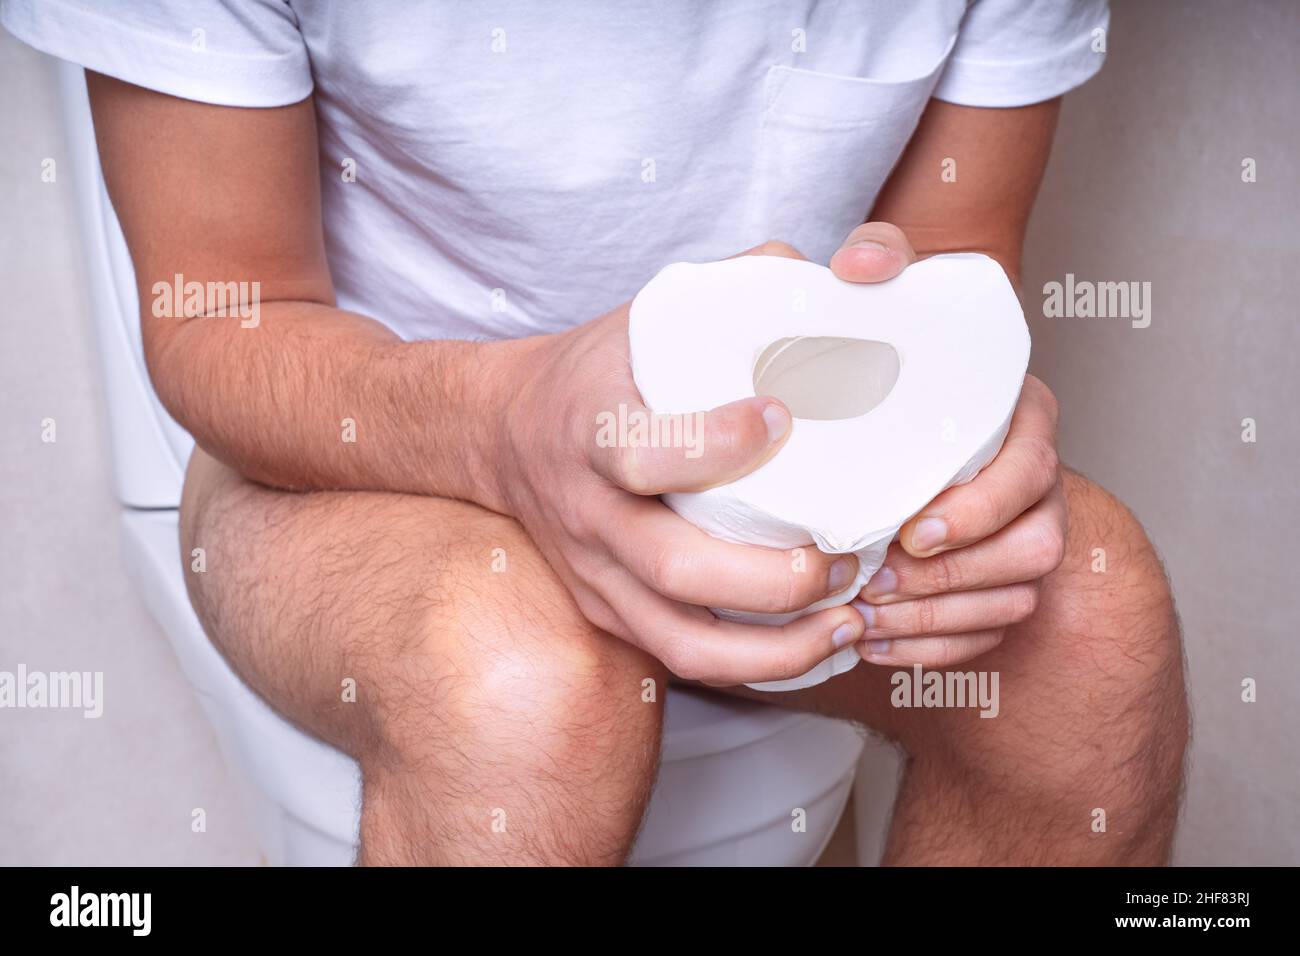 Man sitting on the toilet with toilet paper and suffering from constipation, diarrhea, stomach ache or cramps Stock Photo